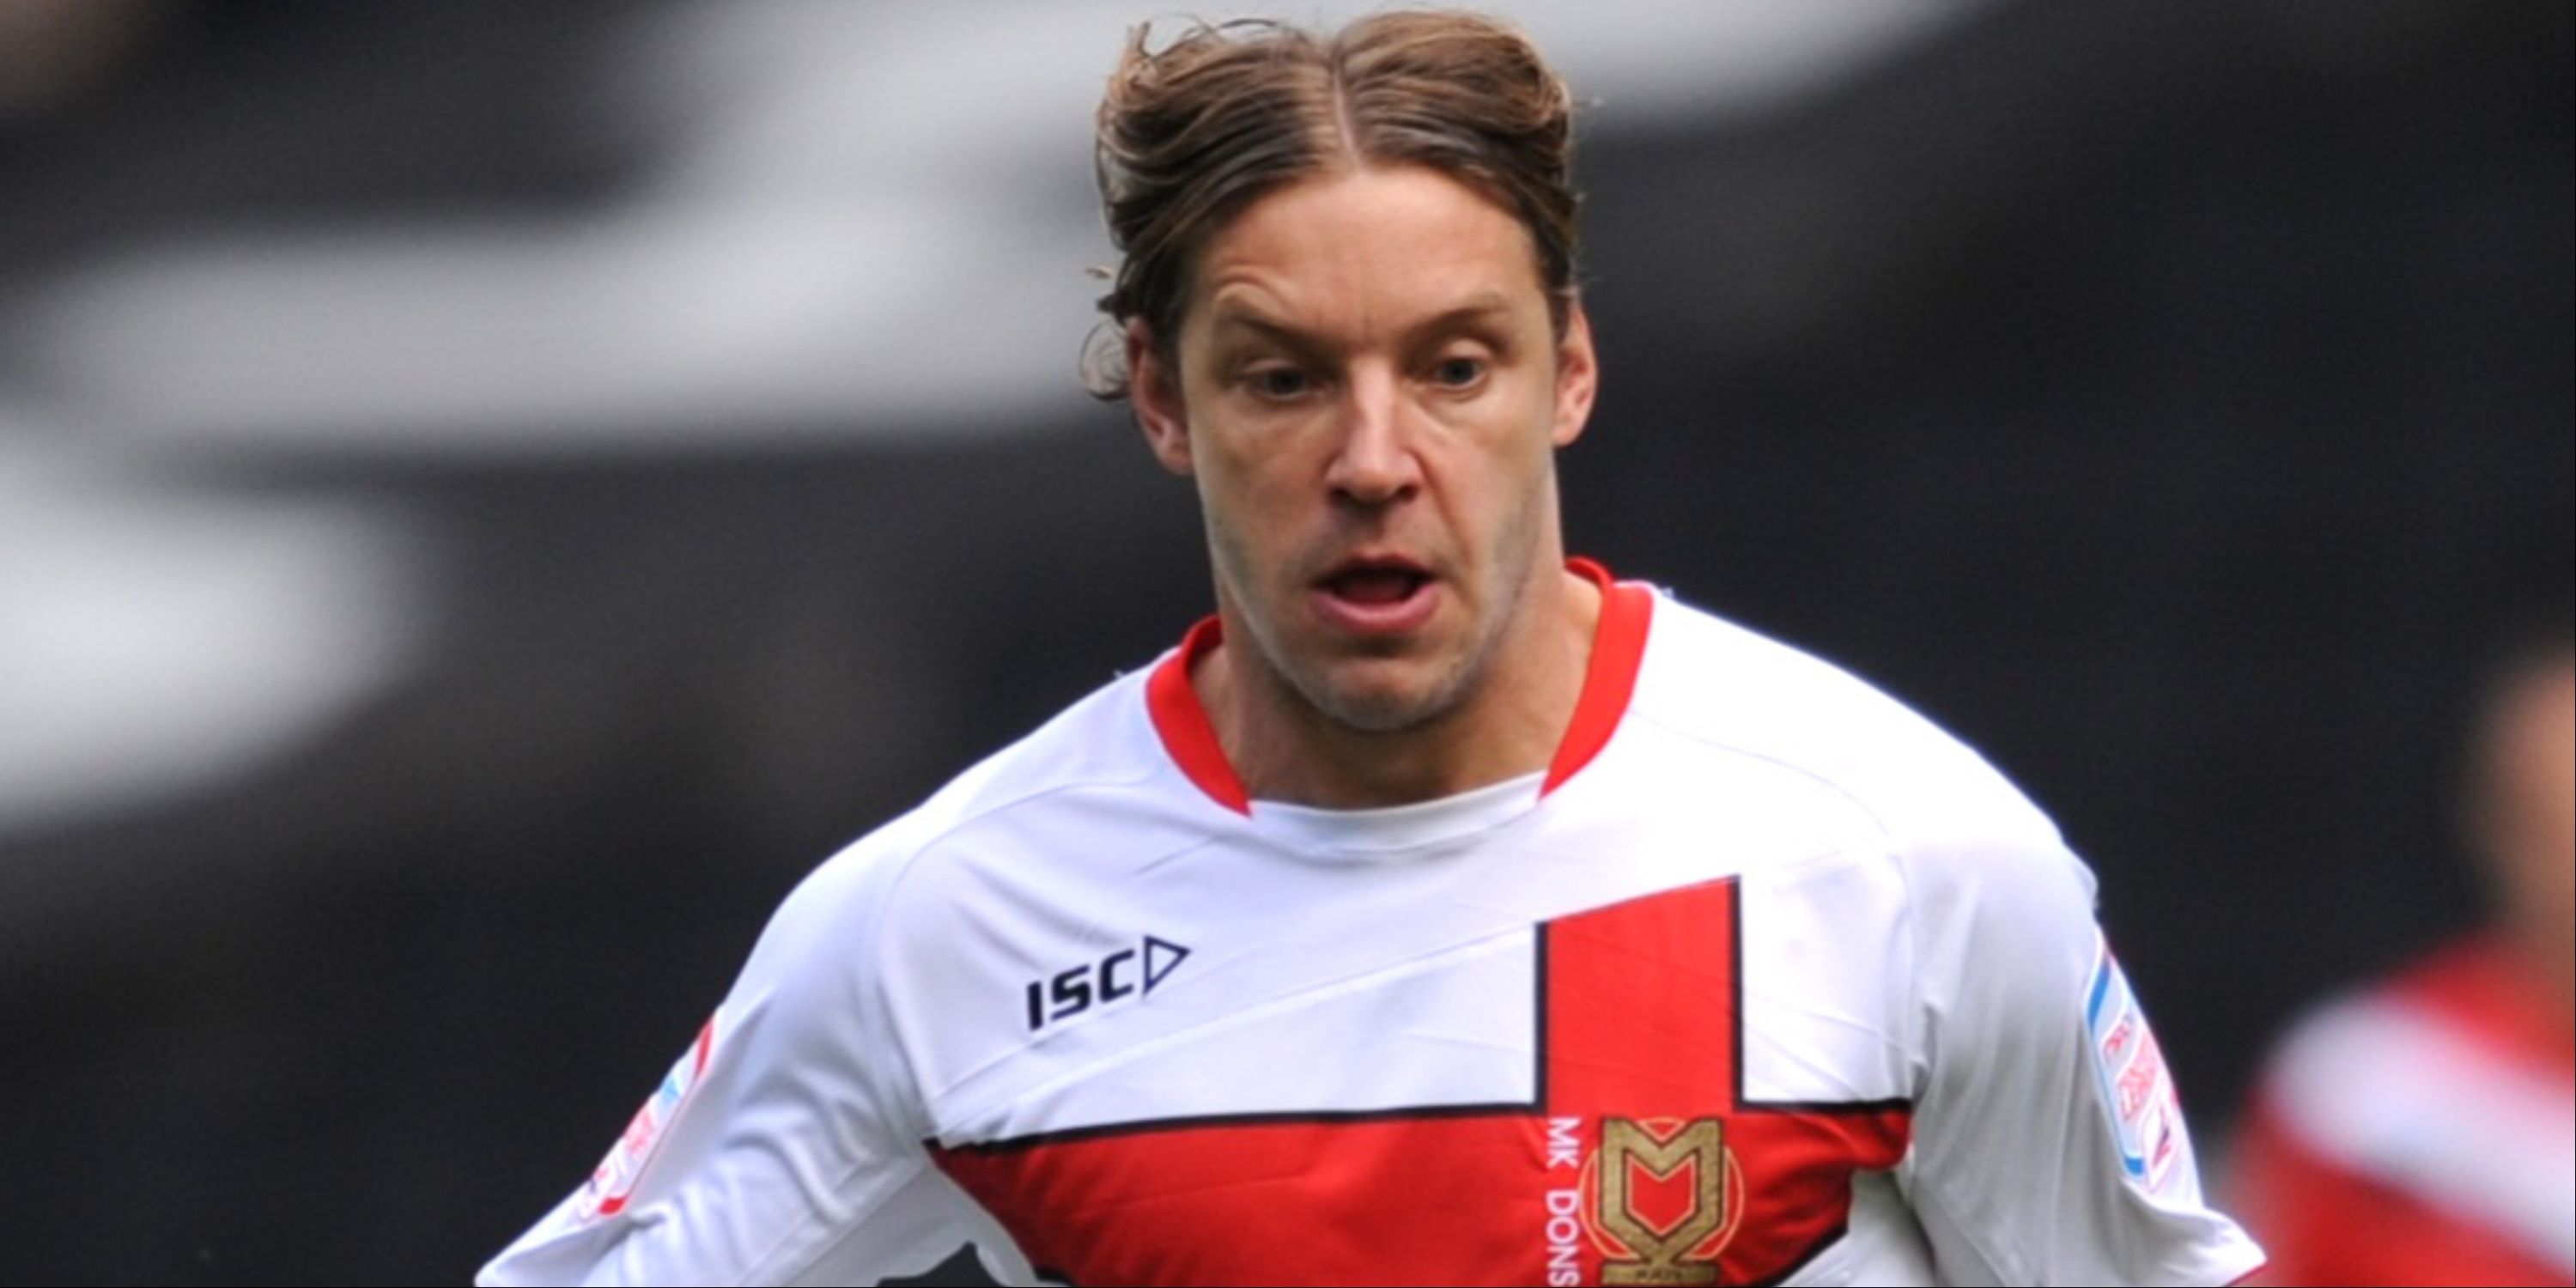 Alan Smith in action for MK Dons